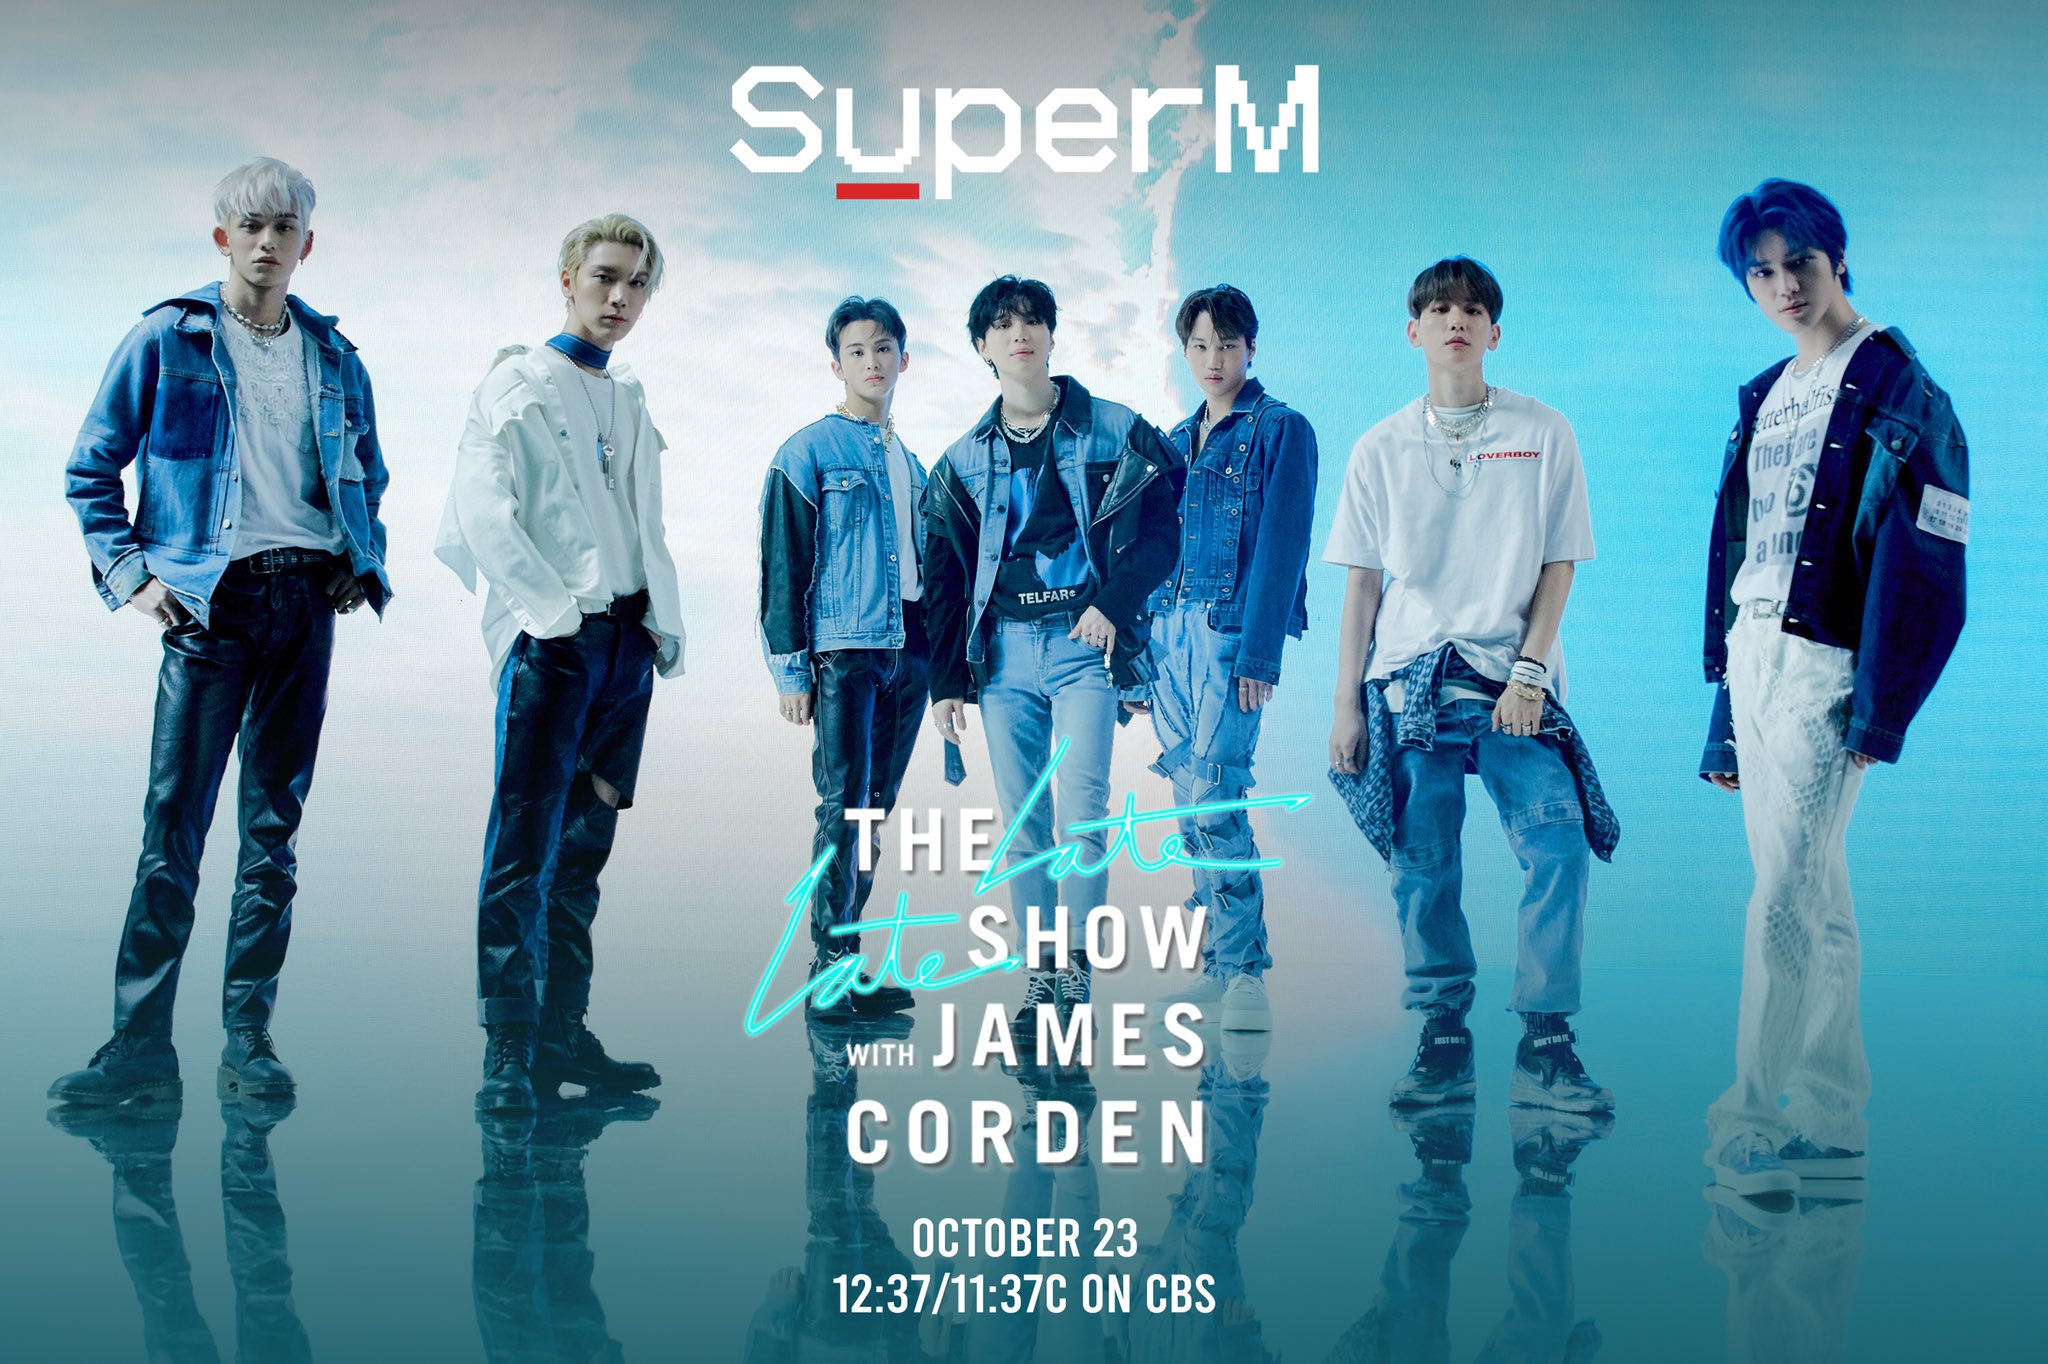 superm-to-make-guest-appearance-on-cbs-the-late-late-show-with-james-corden-on-october-23-2